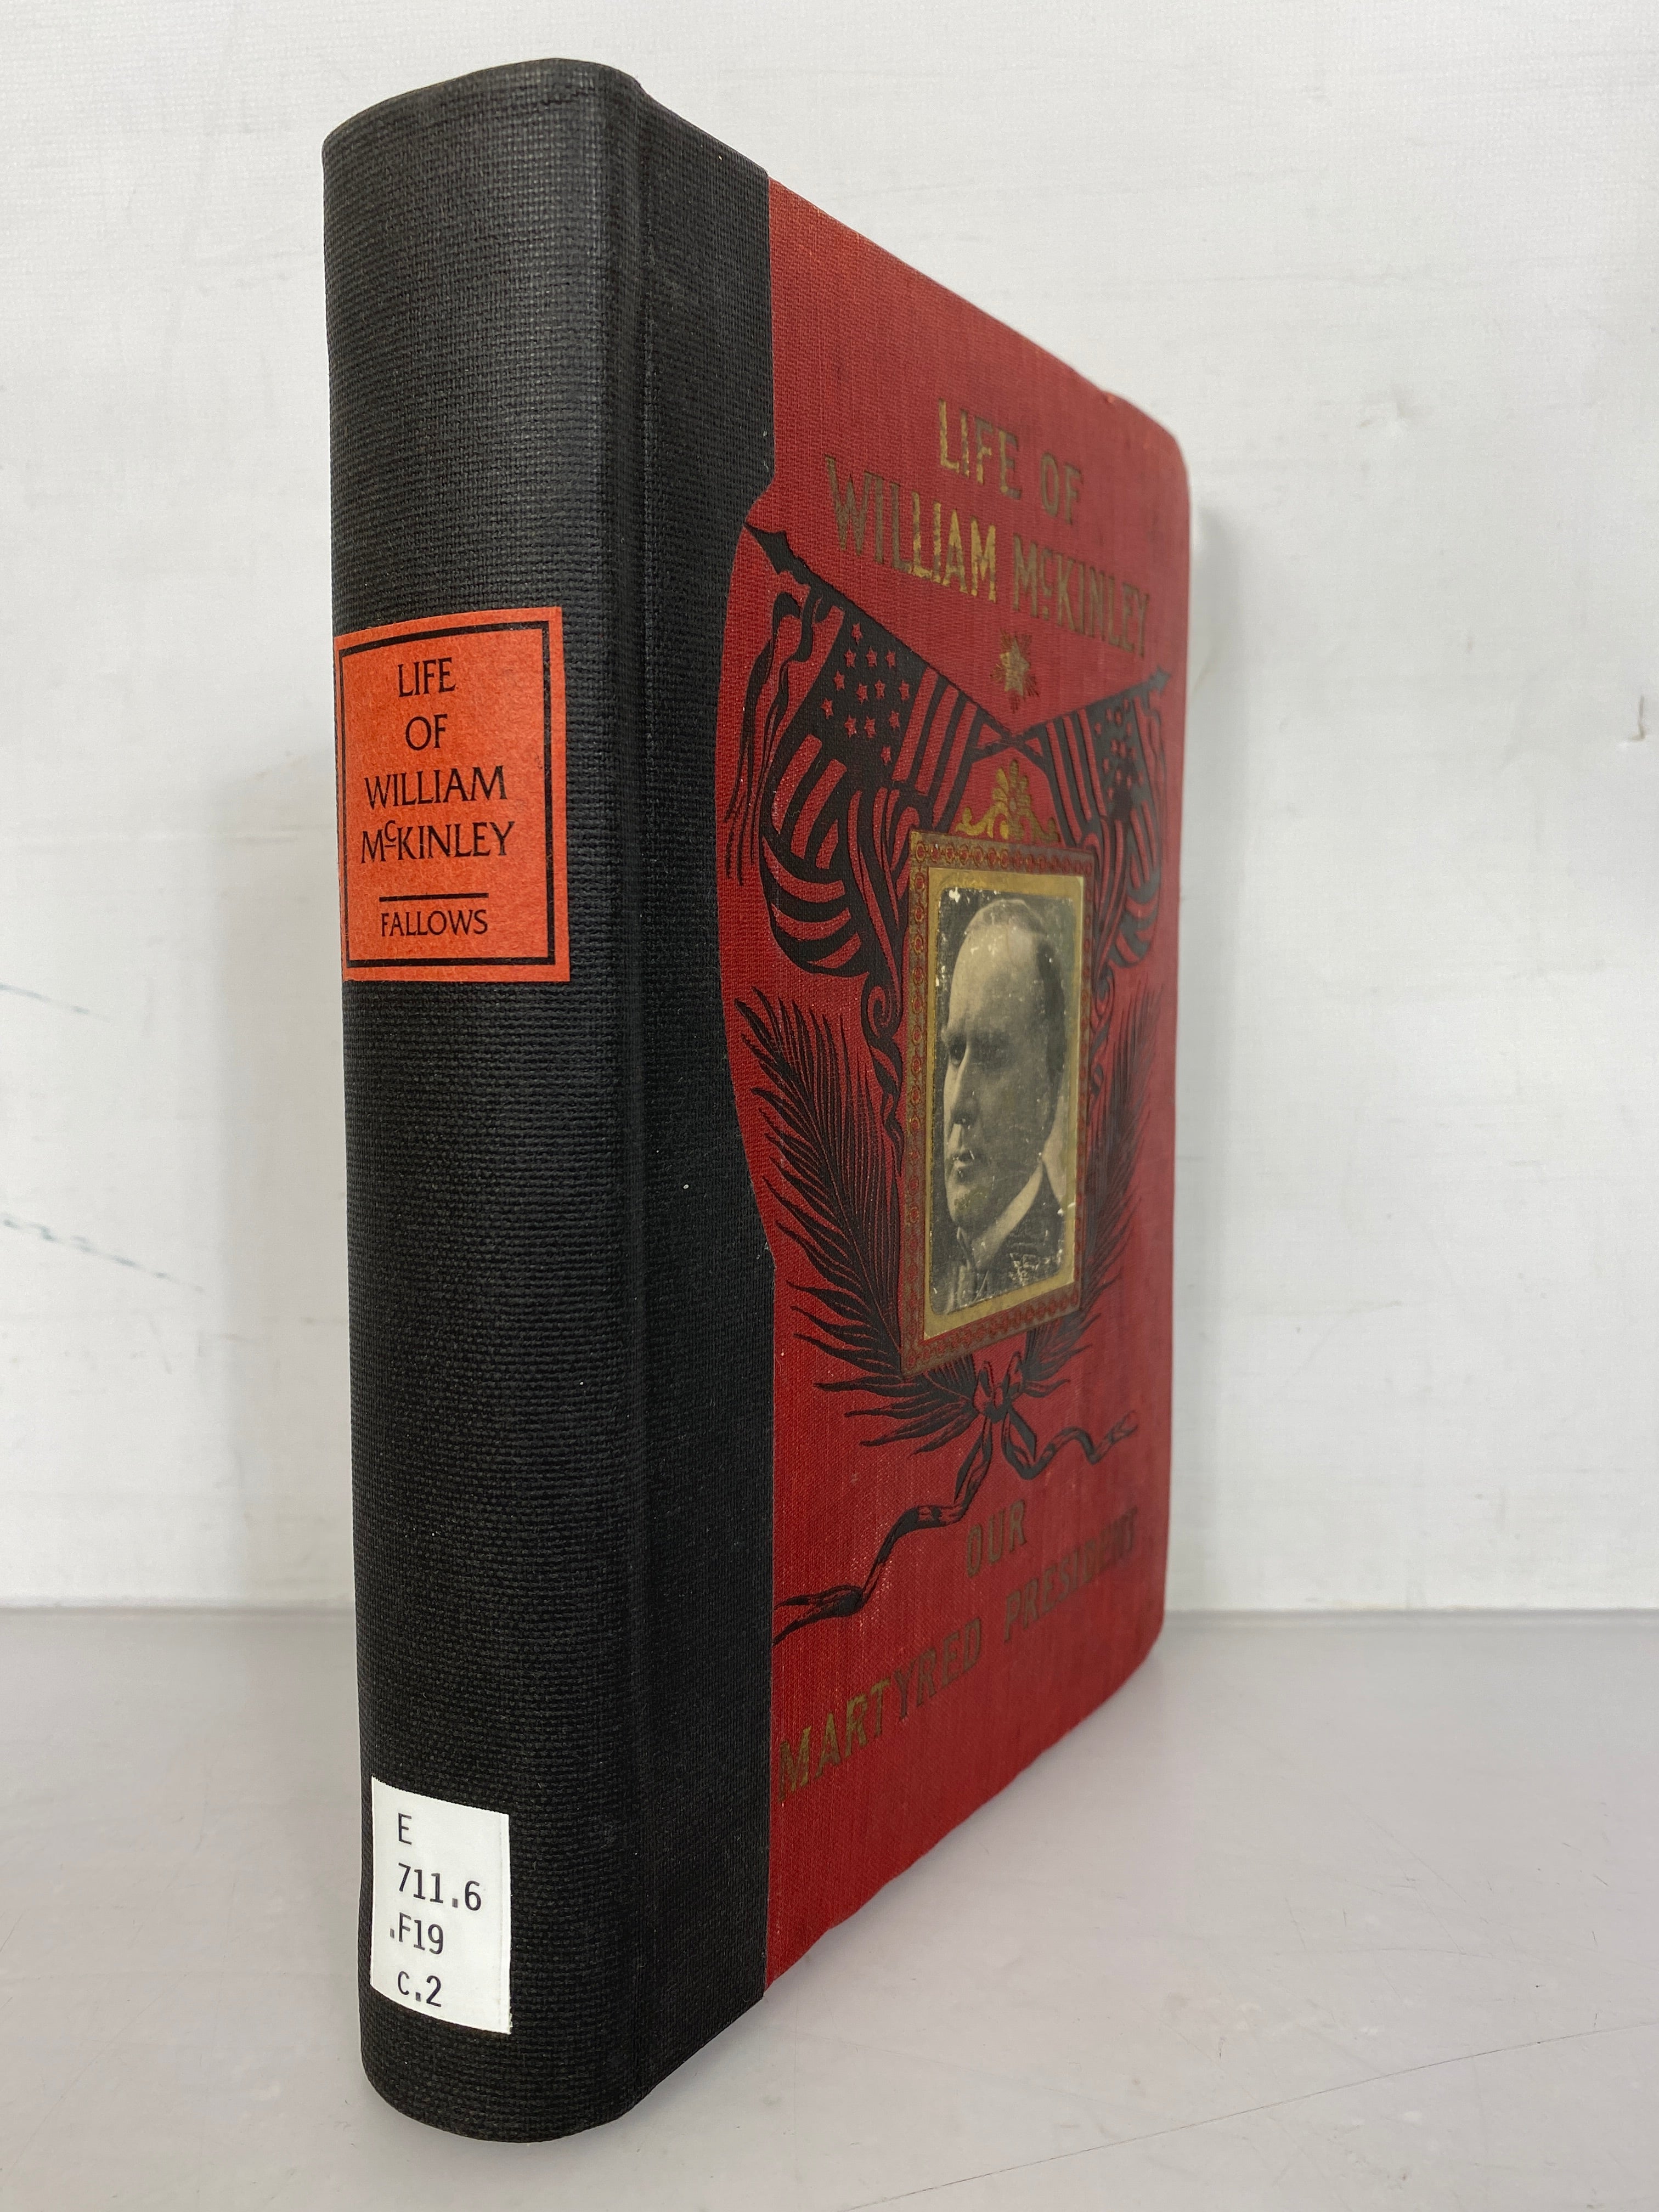 Life of William McKinley Our Martyred President 1901 by Fallows HC